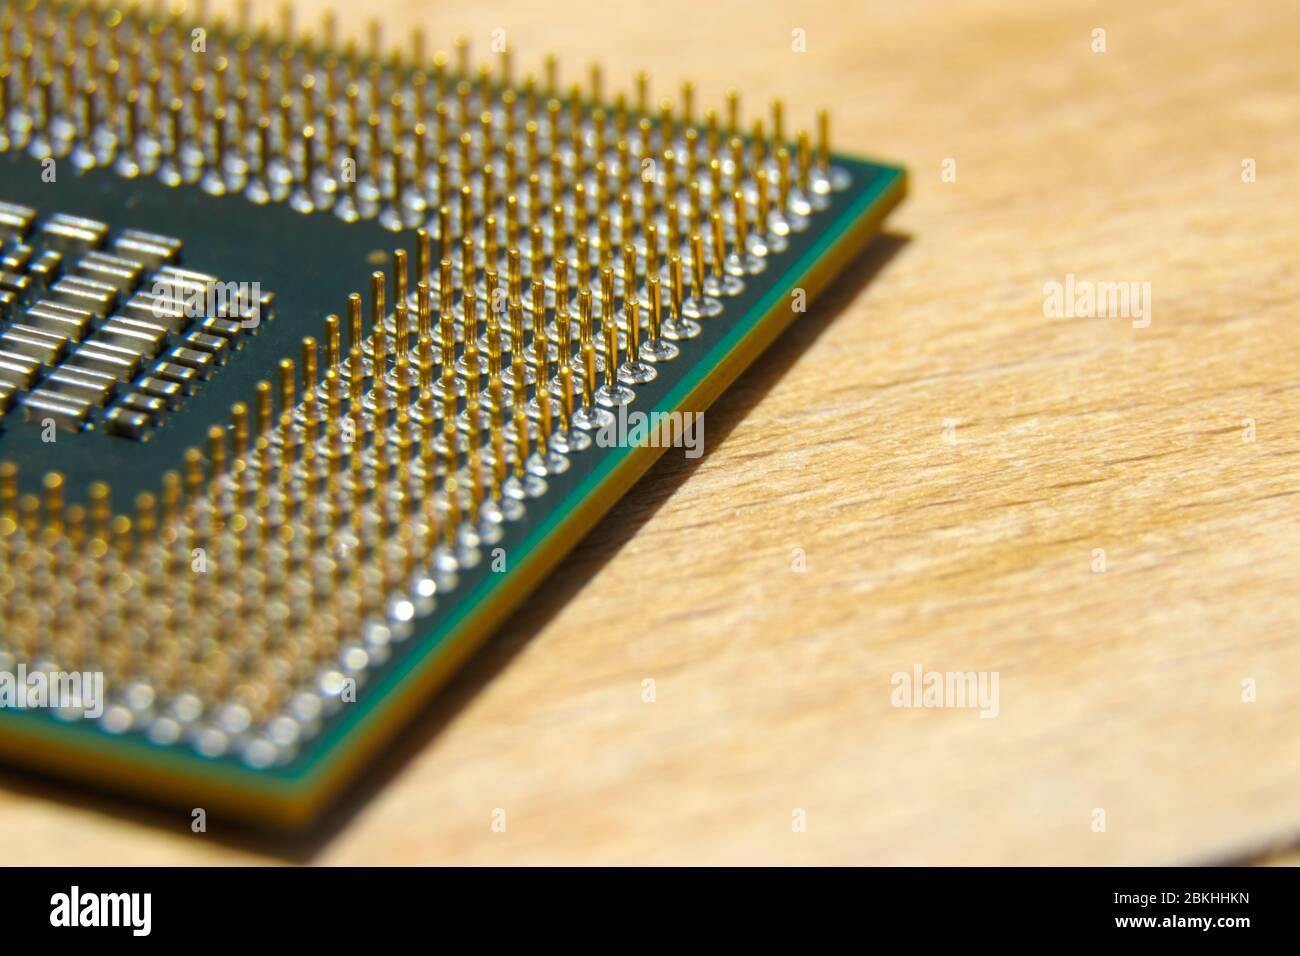 Processor on the wood table Stock Photo